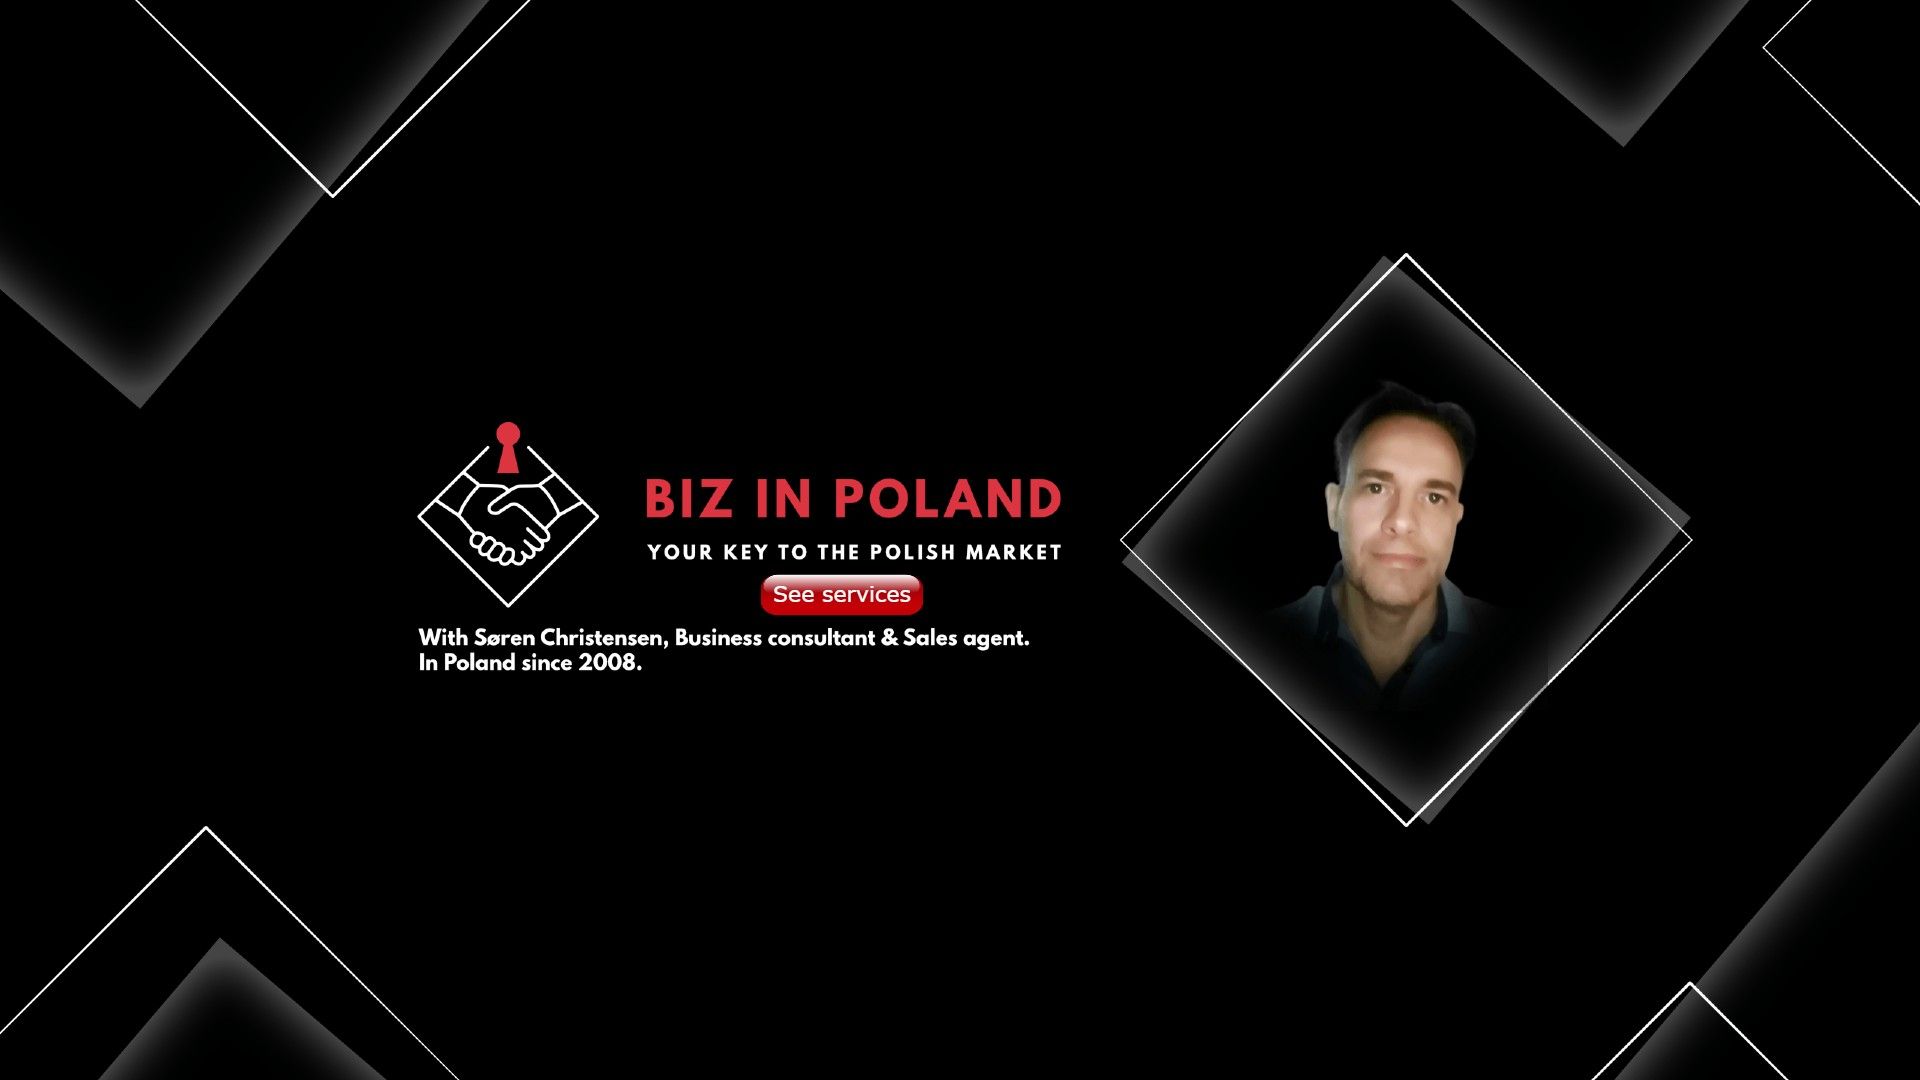 Consulting regarding Business in Poland and Denmark and sales agent in the Polish market and Danish market